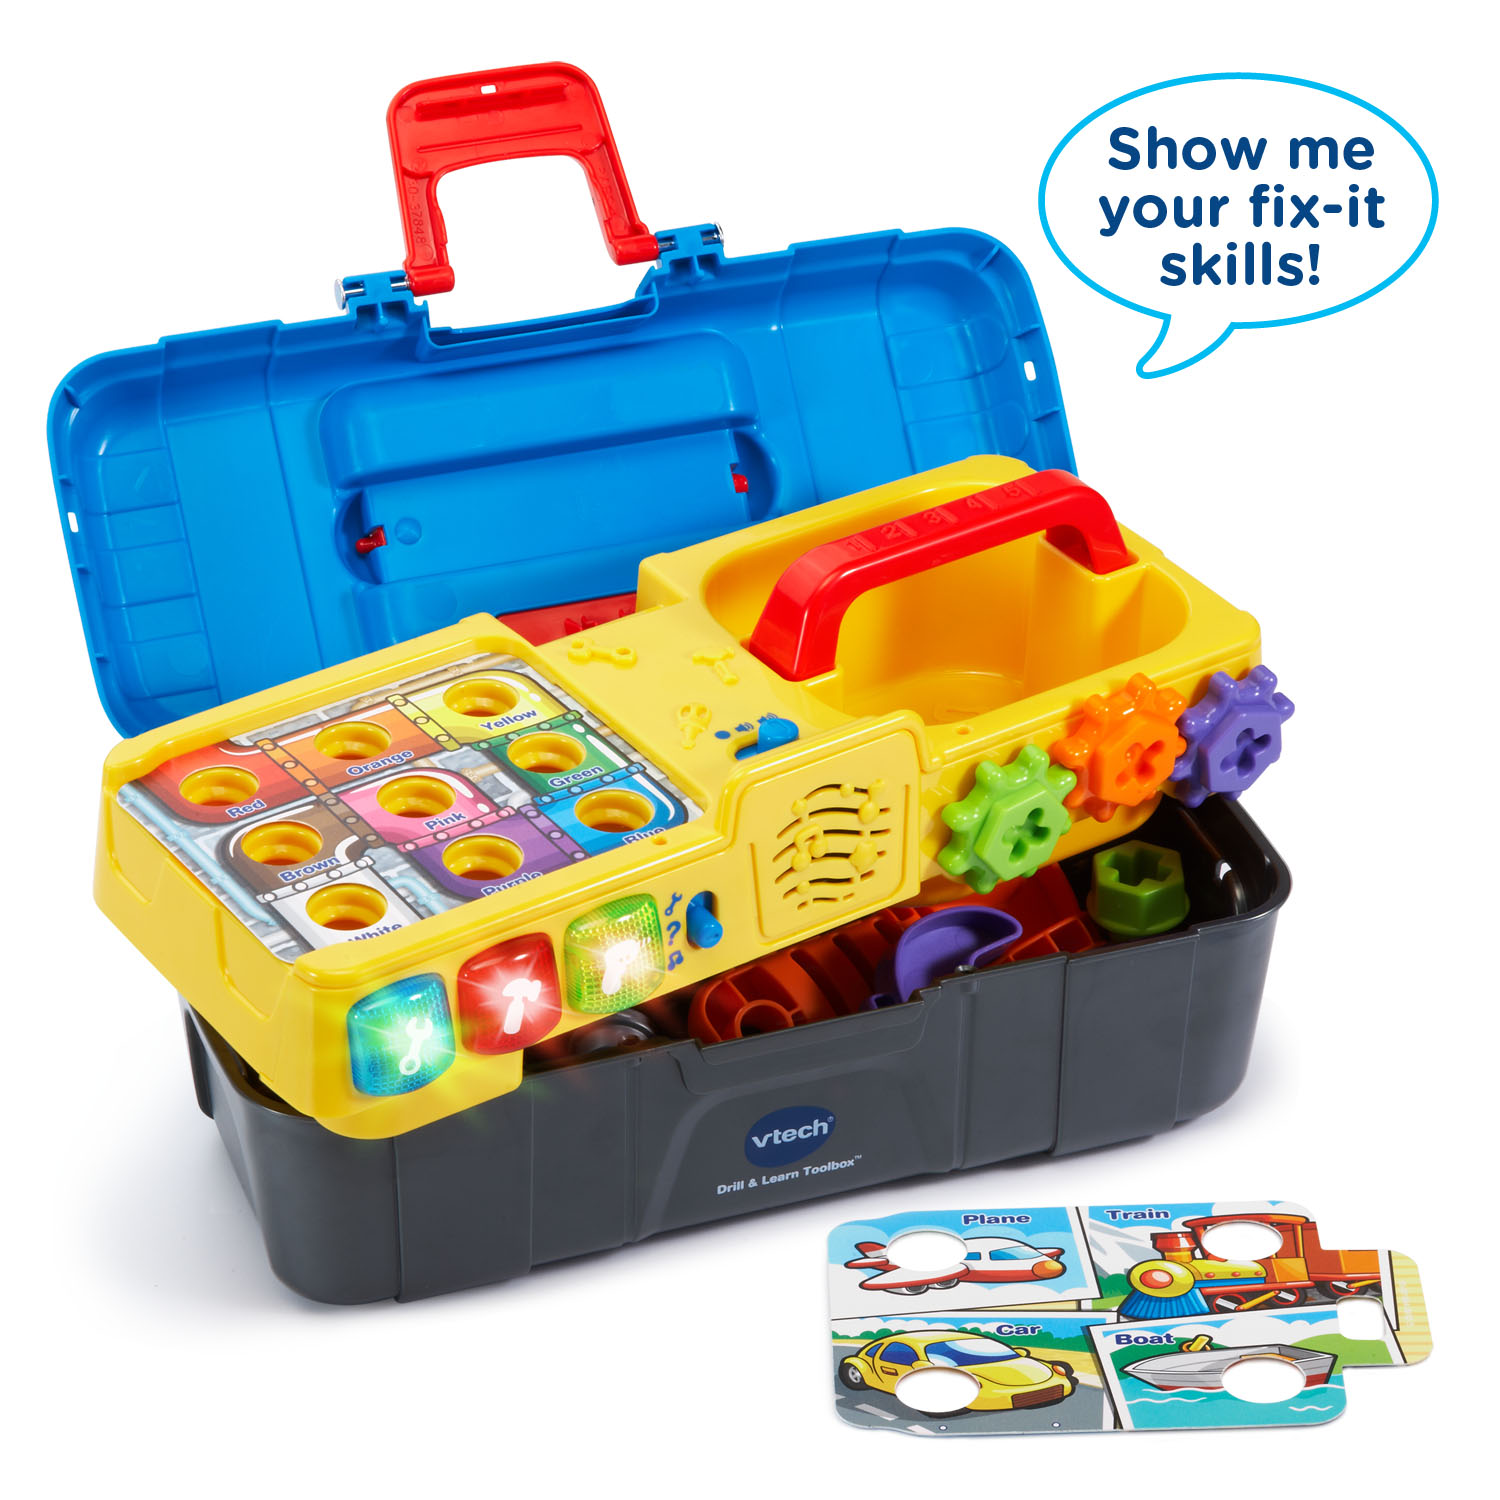 VTech Drill and Learn Toolbox With Working Drill and Tools - image 3 of 5